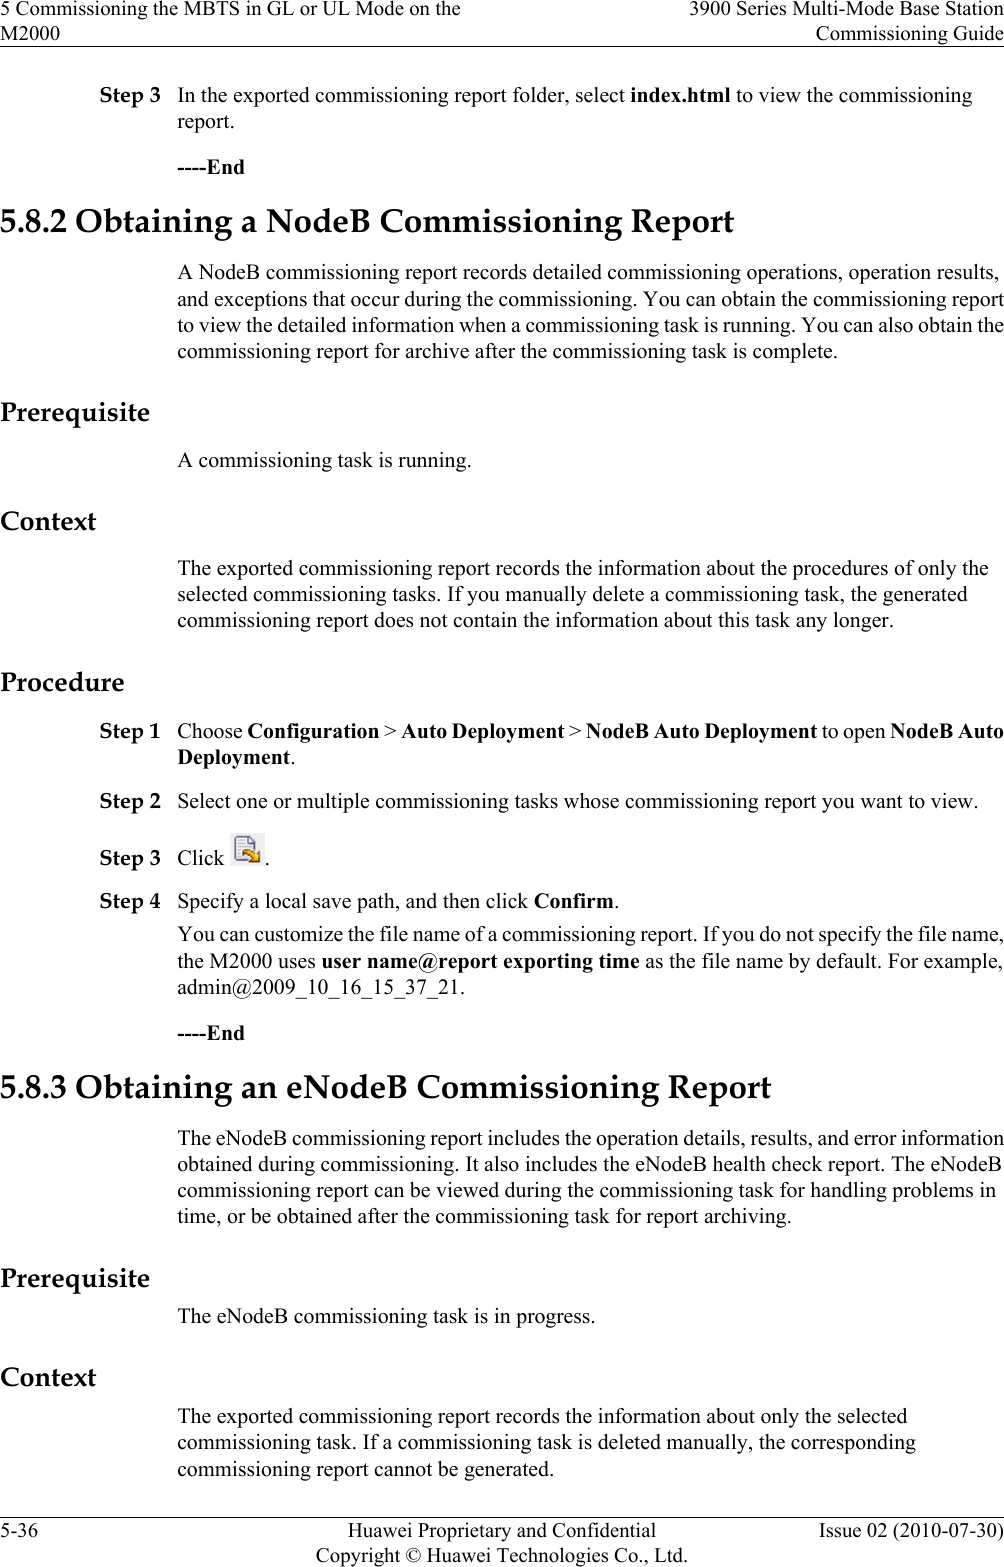 Step 3 In the exported commissioning report folder, select index.html to view the commissioningreport.----End5.8.2 Obtaining a NodeB Commissioning ReportA NodeB commissioning report records detailed commissioning operations, operation results,and exceptions that occur during the commissioning. You can obtain the commissioning reportto view the detailed information when a commissioning task is running. You can also obtain thecommissioning report for archive after the commissioning task is complete.PrerequisiteA commissioning task is running.ContextThe exported commissioning report records the information about the procedures of only theselected commissioning tasks. If you manually delete a commissioning task, the generatedcommissioning report does not contain the information about this task any longer.ProcedureStep 1 Choose Configuration &gt; Auto Deployment &gt; NodeB Auto Deployment to open NodeB AutoDeployment.Step 2 Select one or multiple commissioning tasks whose commissioning report you want to view.Step 3 Click  .Step 4 Specify a local save path, and then click Confirm.You can customize the file name of a commissioning report. If you do not specify the file name,the M2000 uses user name@report exporting time as the file name by default. For example,admin@2009_10_16_15_37_21.----End5.8.3 Obtaining an eNodeB Commissioning ReportThe eNodeB commissioning report includes the operation details, results, and error informationobtained during commissioning. It also includes the eNodeB health check report. The eNodeBcommissioning report can be viewed during the commissioning task for handling problems intime, or be obtained after the commissioning task for report archiving.PrerequisiteThe eNodeB commissioning task is in progress.ContextThe exported commissioning report records the information about only the selectedcommissioning task. If a commissioning task is deleted manually, the correspondingcommissioning report cannot be generated.5 Commissioning the MBTS in GL or UL Mode on theM20003900 Series Multi-Mode Base StationCommissioning Guide5-36 Huawei Proprietary and ConfidentialCopyright © Huawei Technologies Co., Ltd.Issue 02 (2010-07-30)